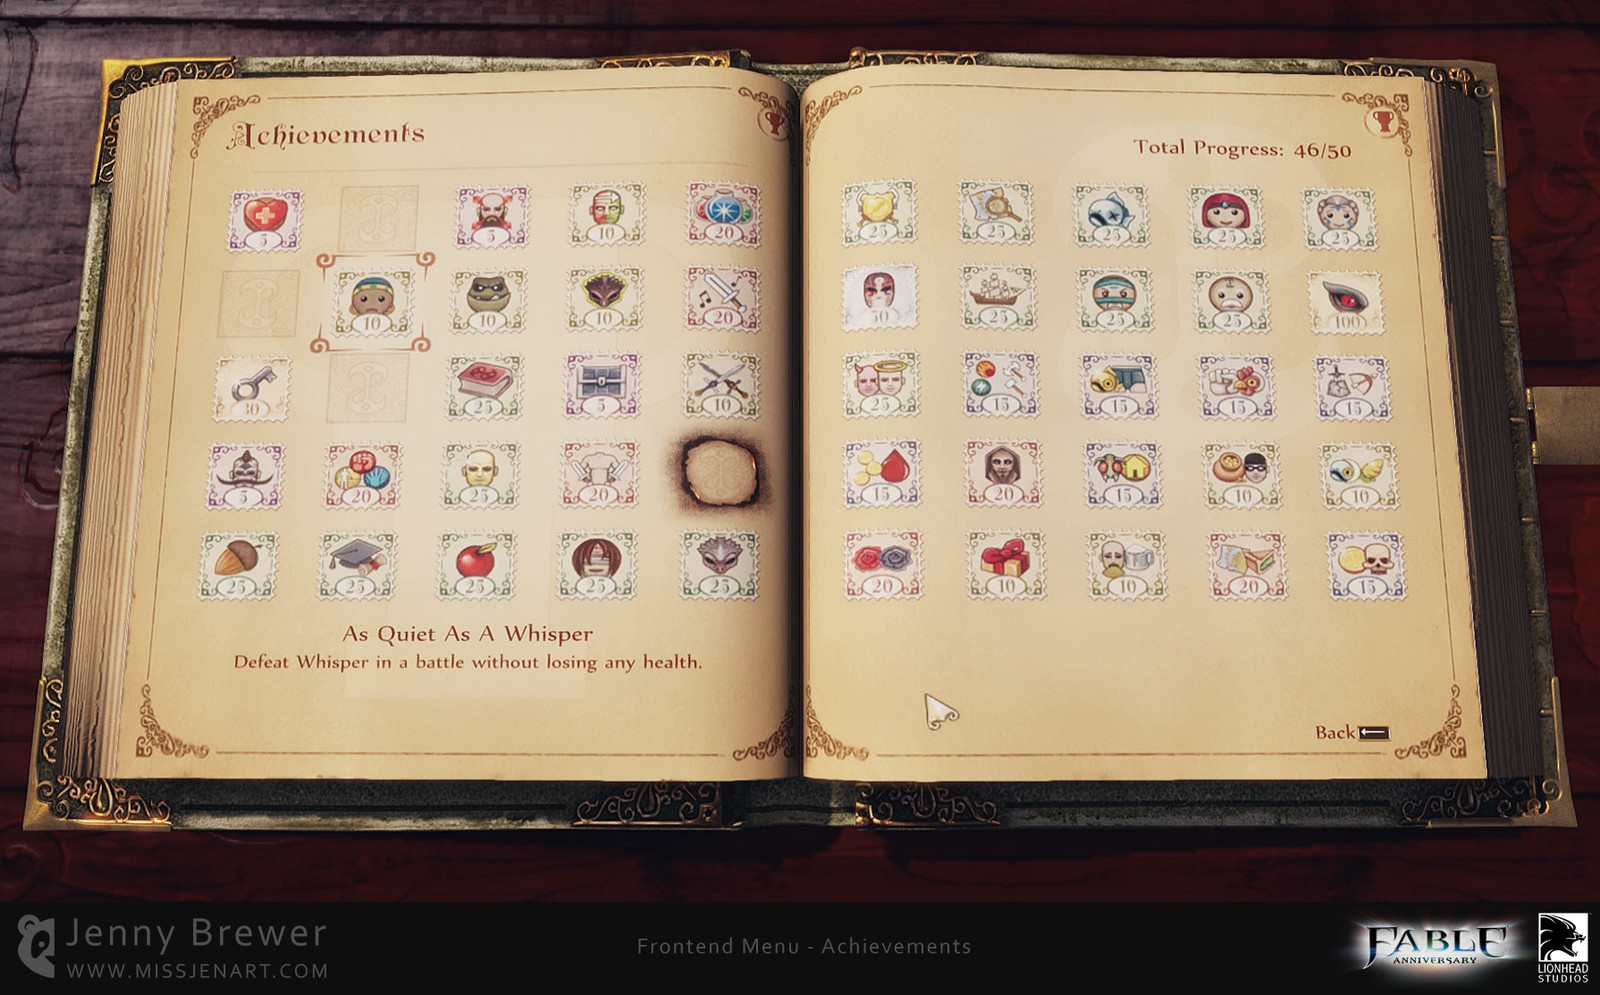 Many Achievements have an either/or element to them, whichever choice the player makes will show the stamp image that is relevant to their actions in the game.